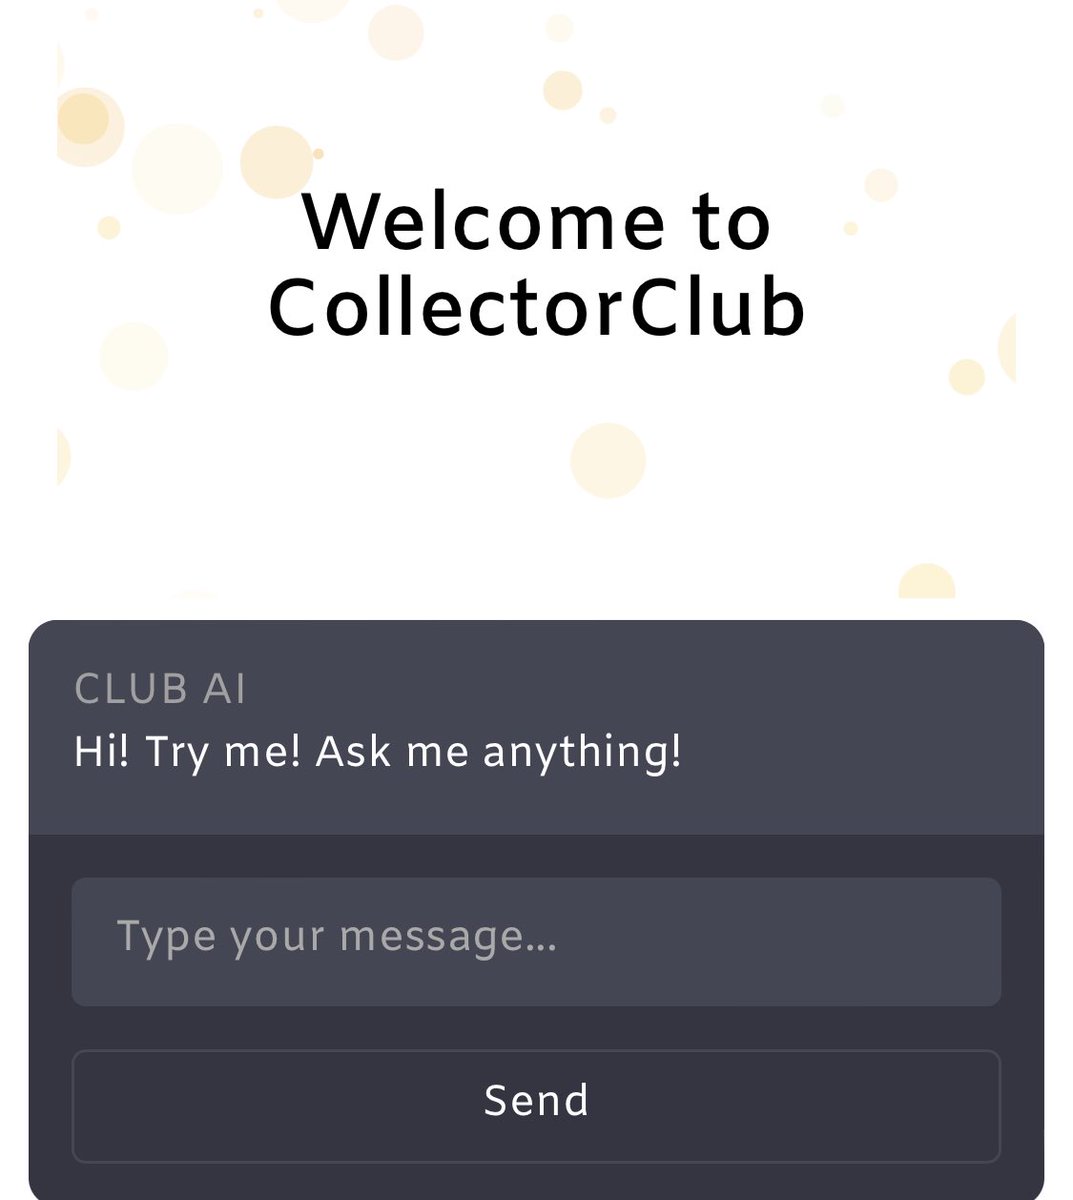 We are thrilled to announce the addition of a new chatbot AI powered by OpenAI to our website! Get ready to get the info you need in a fast and efficient way! Visit Collectorclub.io #CollectorCLUB #OpenAI #AIChatbot #CollectorsUnite